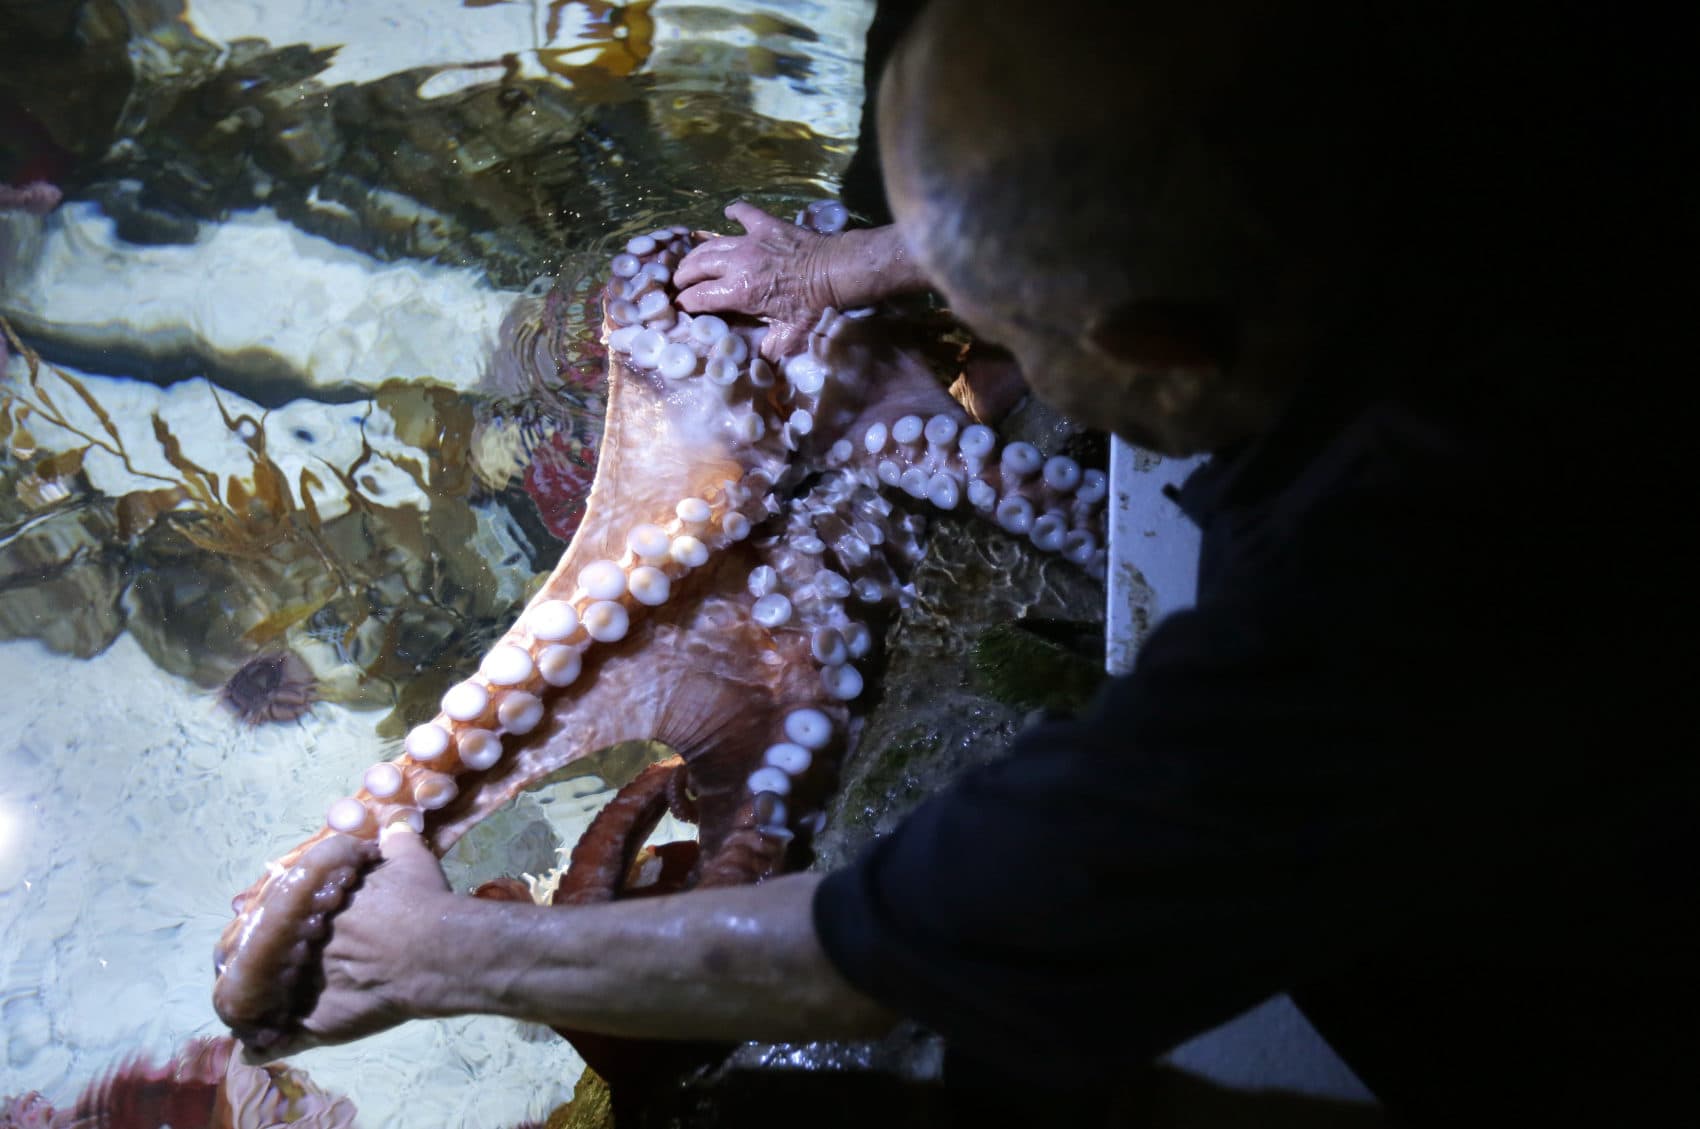 In this Jan. 3, 2019, photo, 84-year-old Wilson Menashi, of Lexington, Mass., interacts with an octopus at the New England Aquarium, in Boston. (Steven Senne/AP)